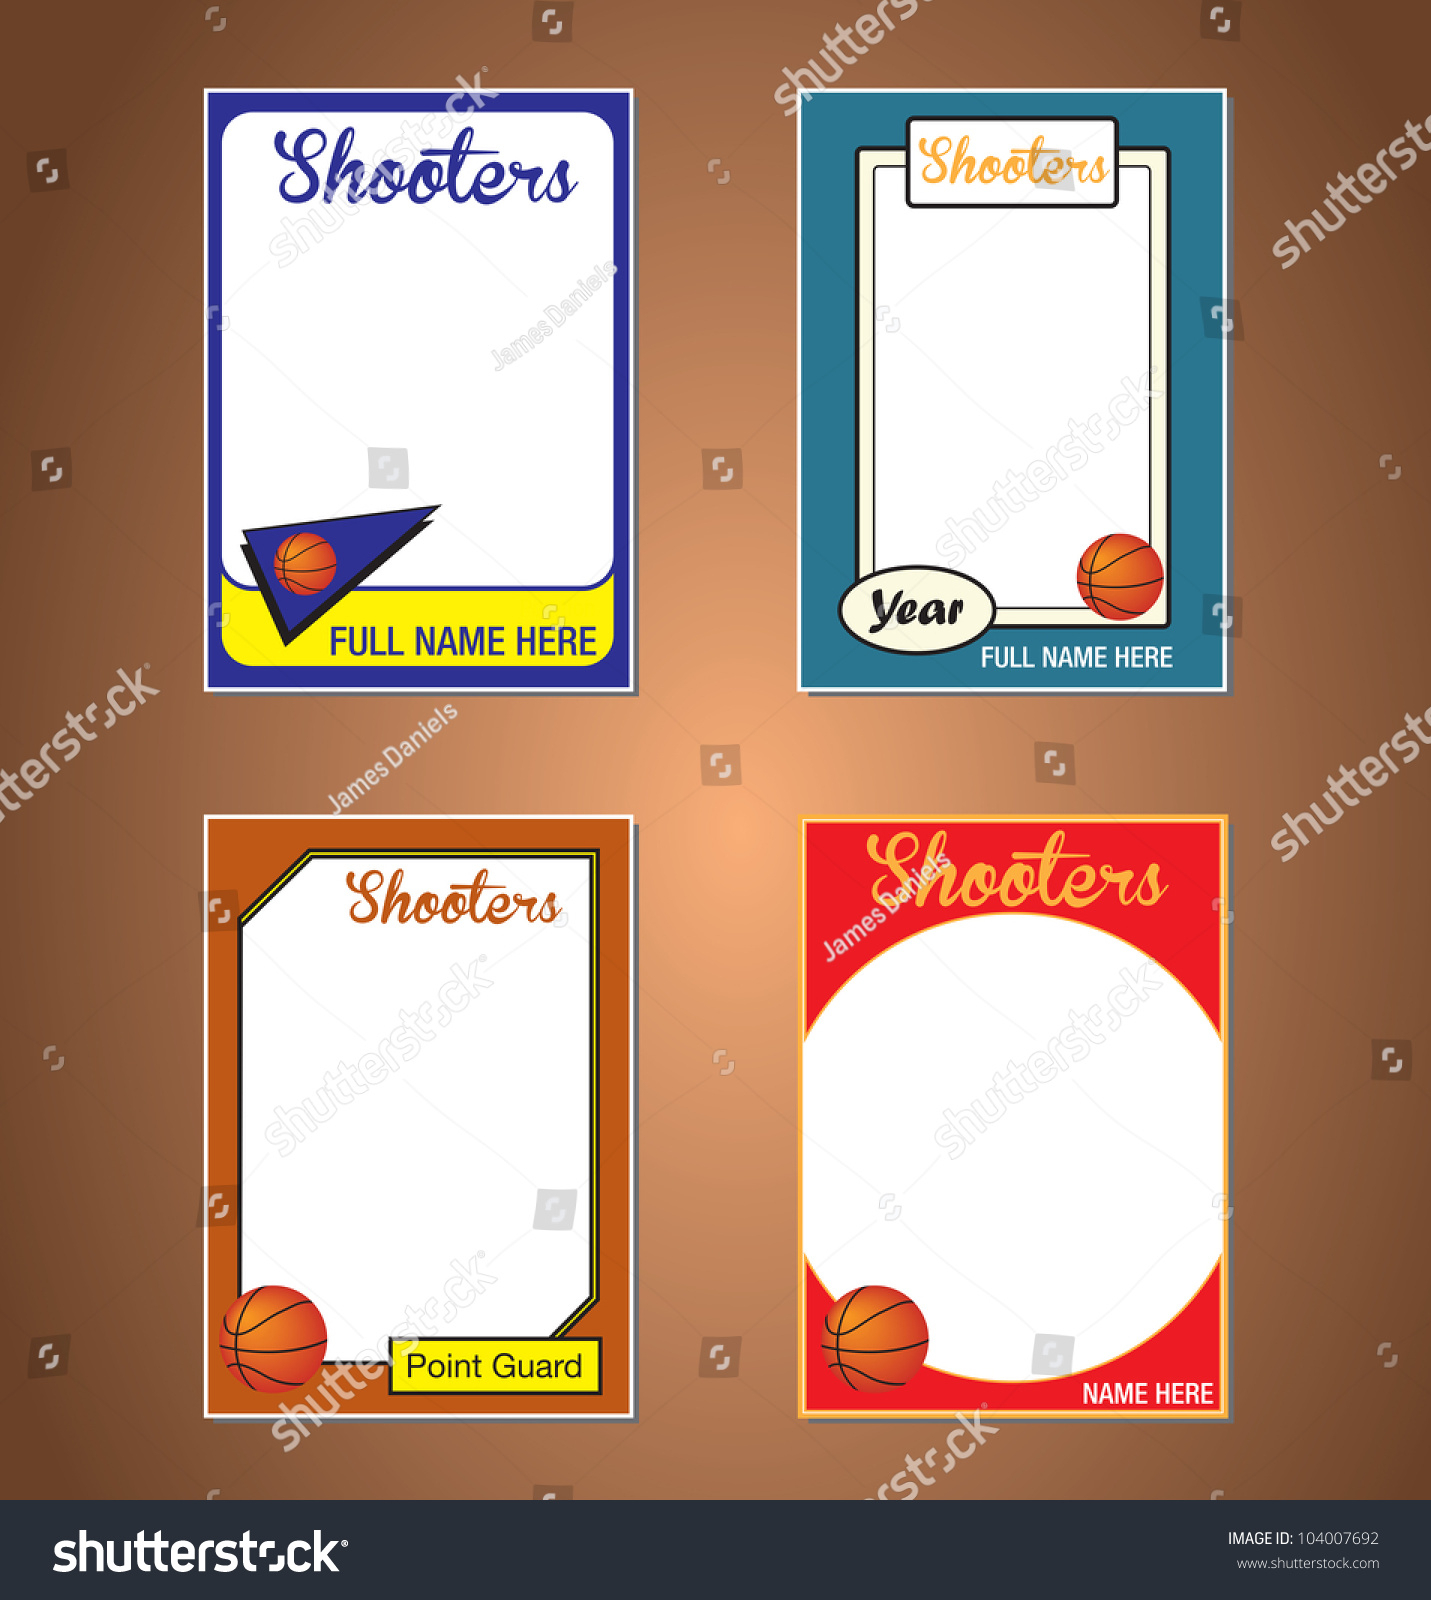 Free Hockey Card Template] The Phillies Room How Make For Free Sports Card Template